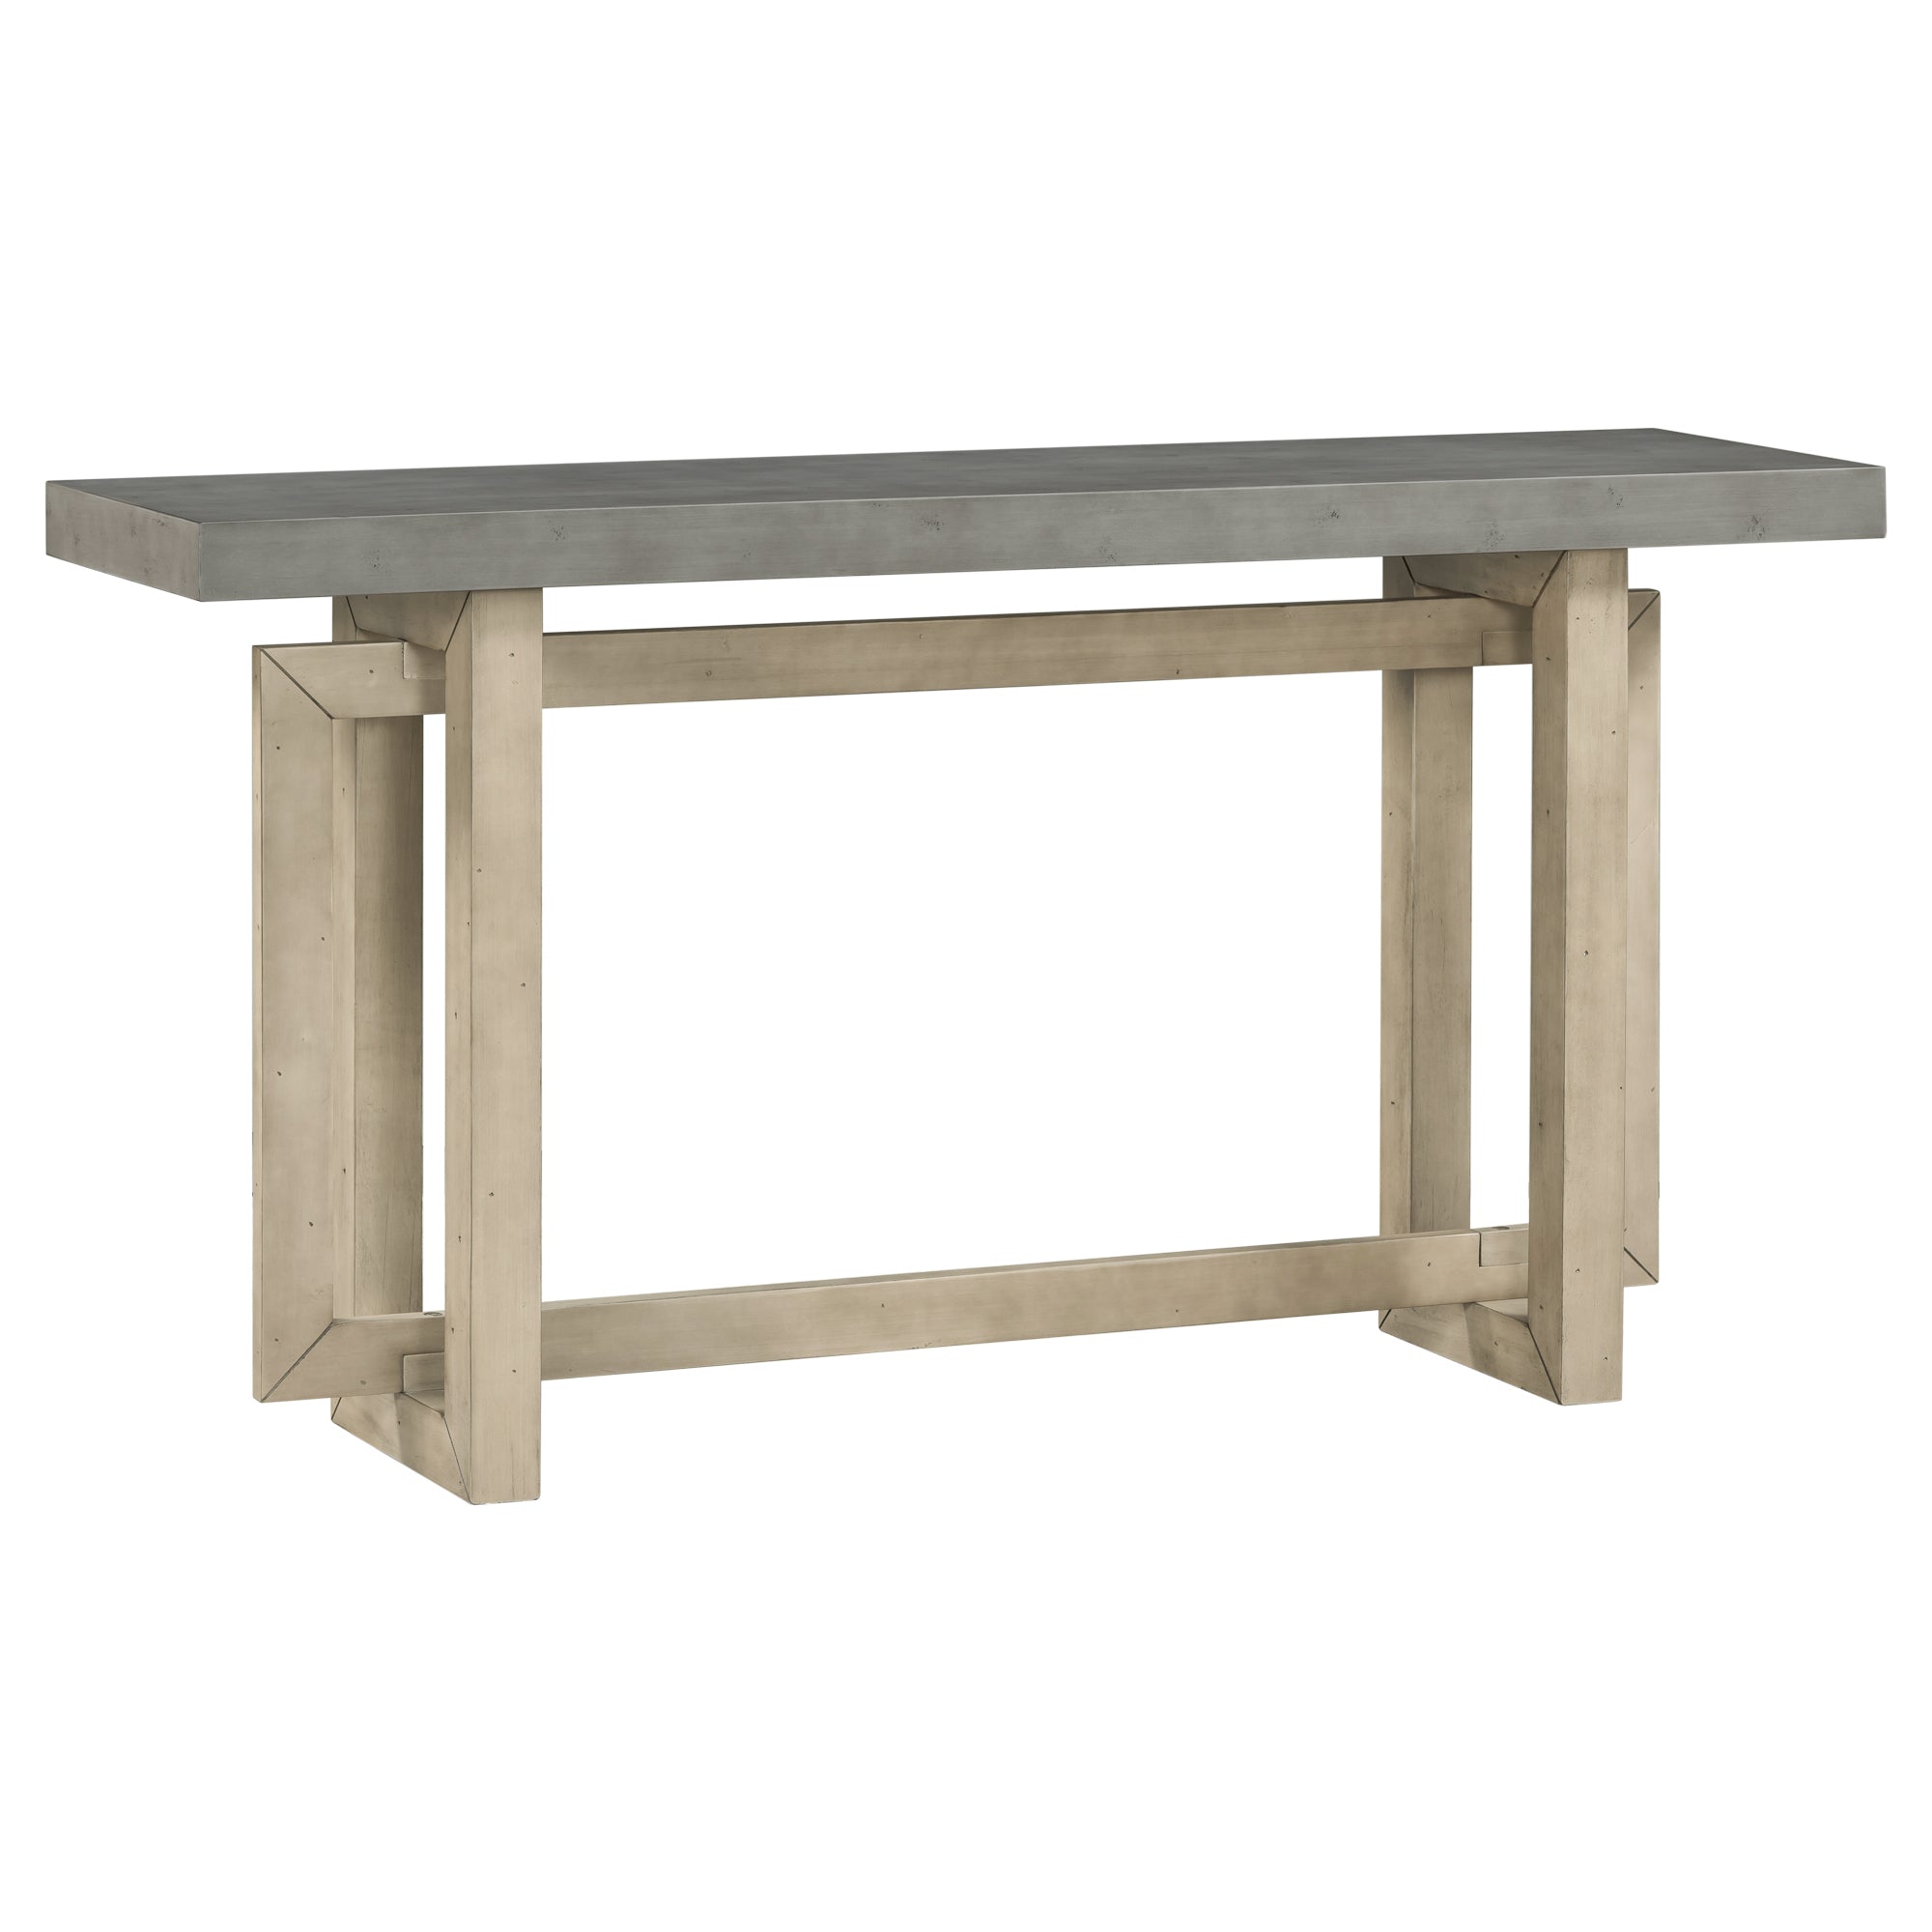 Contemporary Console Table with  Industrial-inspired Concrete Wood Top, Extra Long Entryway Table for Entryway - Gray